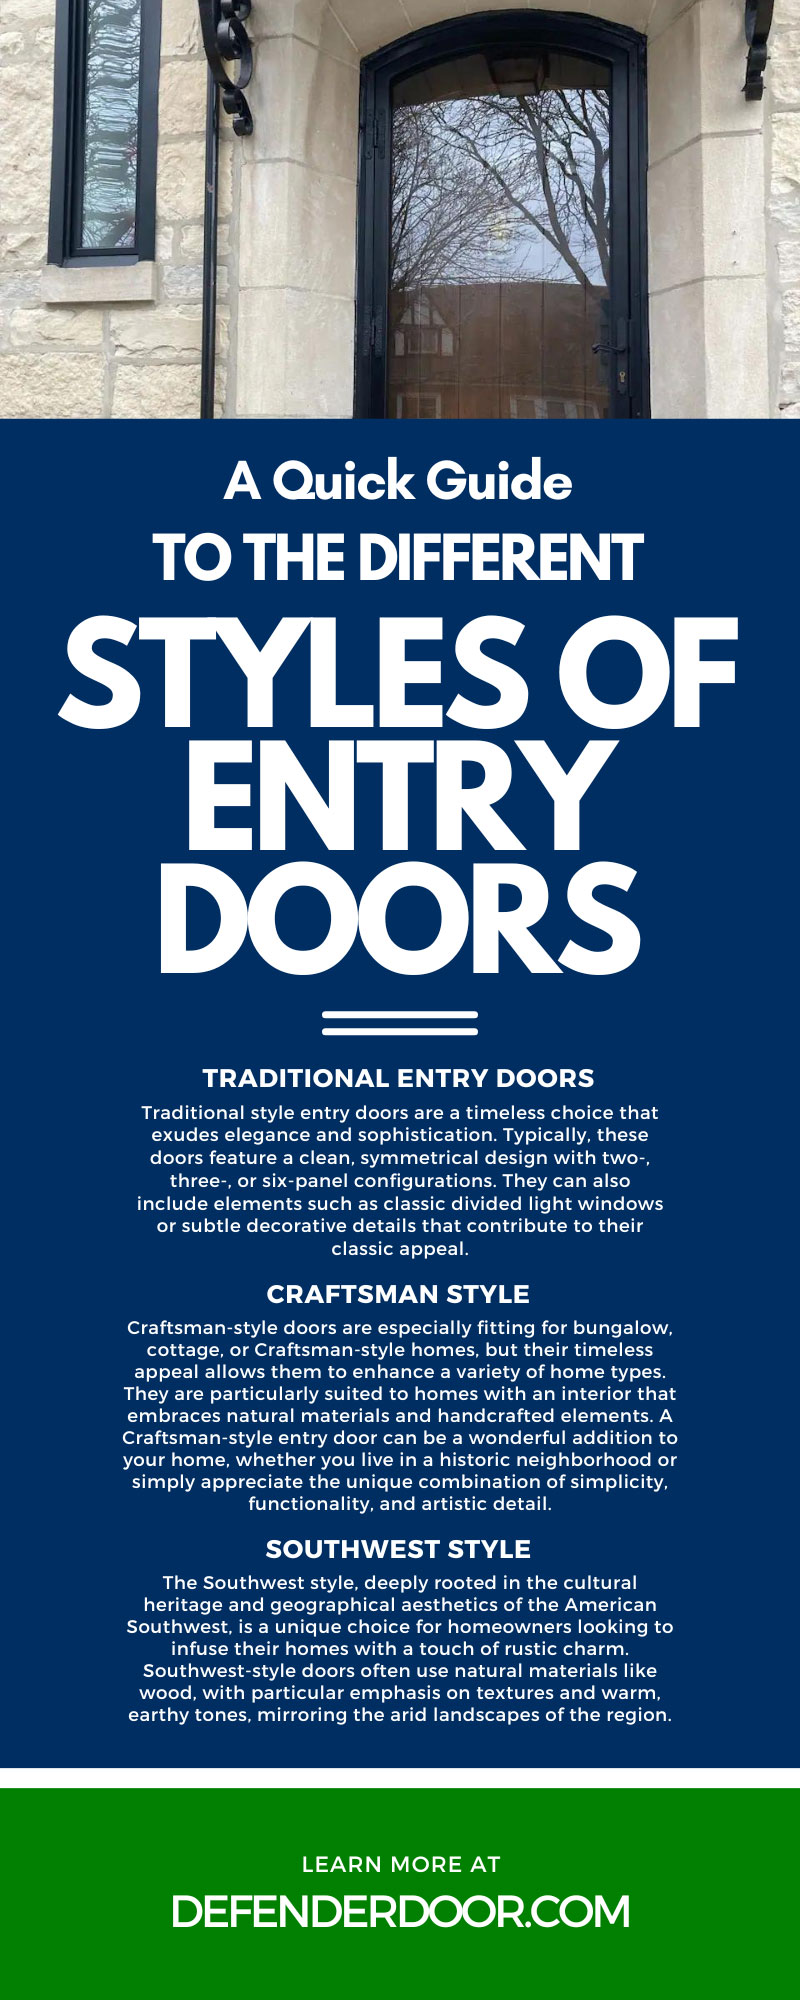 A Quick Guide to the Different Styles of Entry Doors